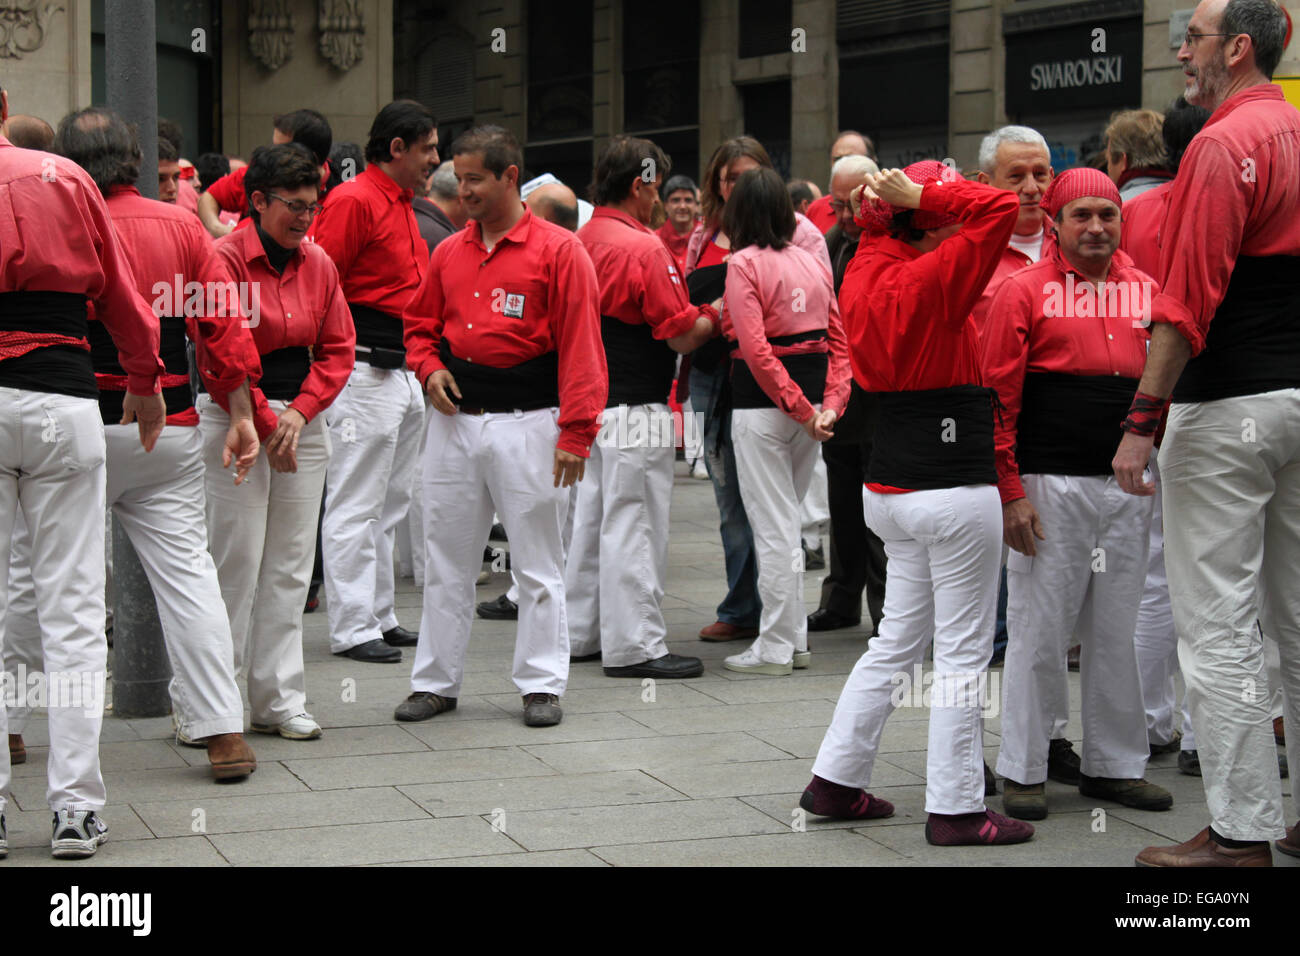 Group of Castellers before beginning to build human towers in Portal de l'Àngel, Barcelona, Catalonia, Spain Stock Photo